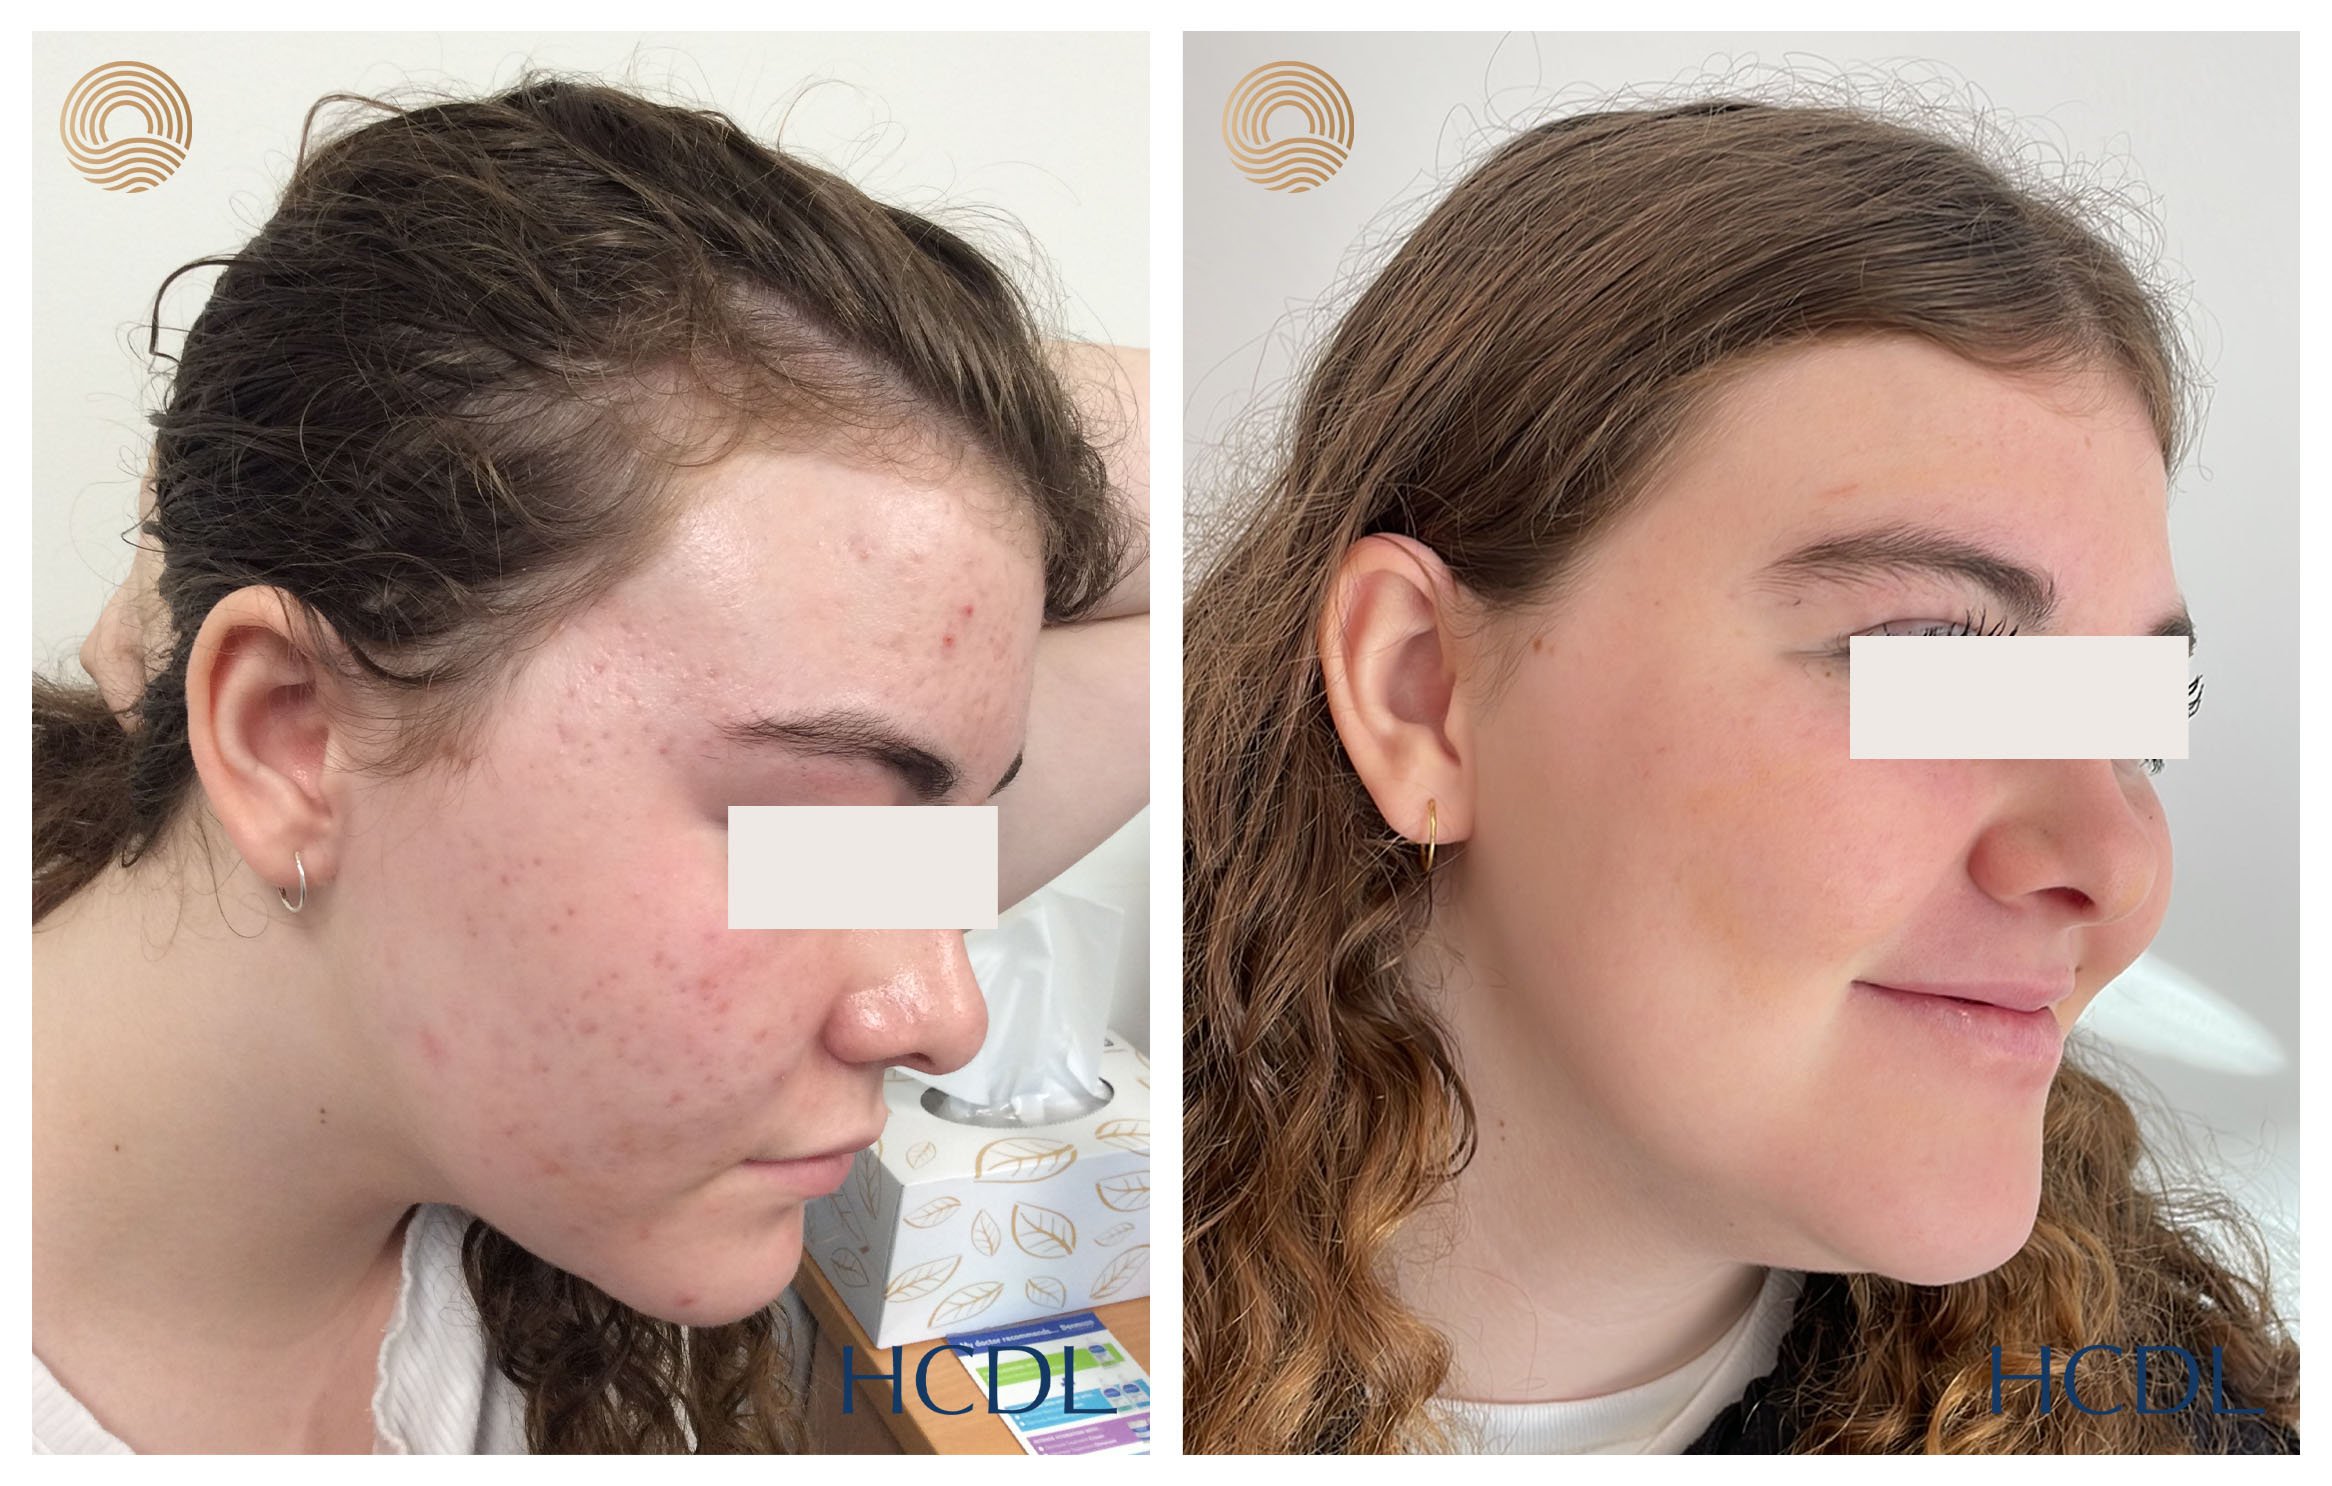 Combined medical and laser management after 10 months